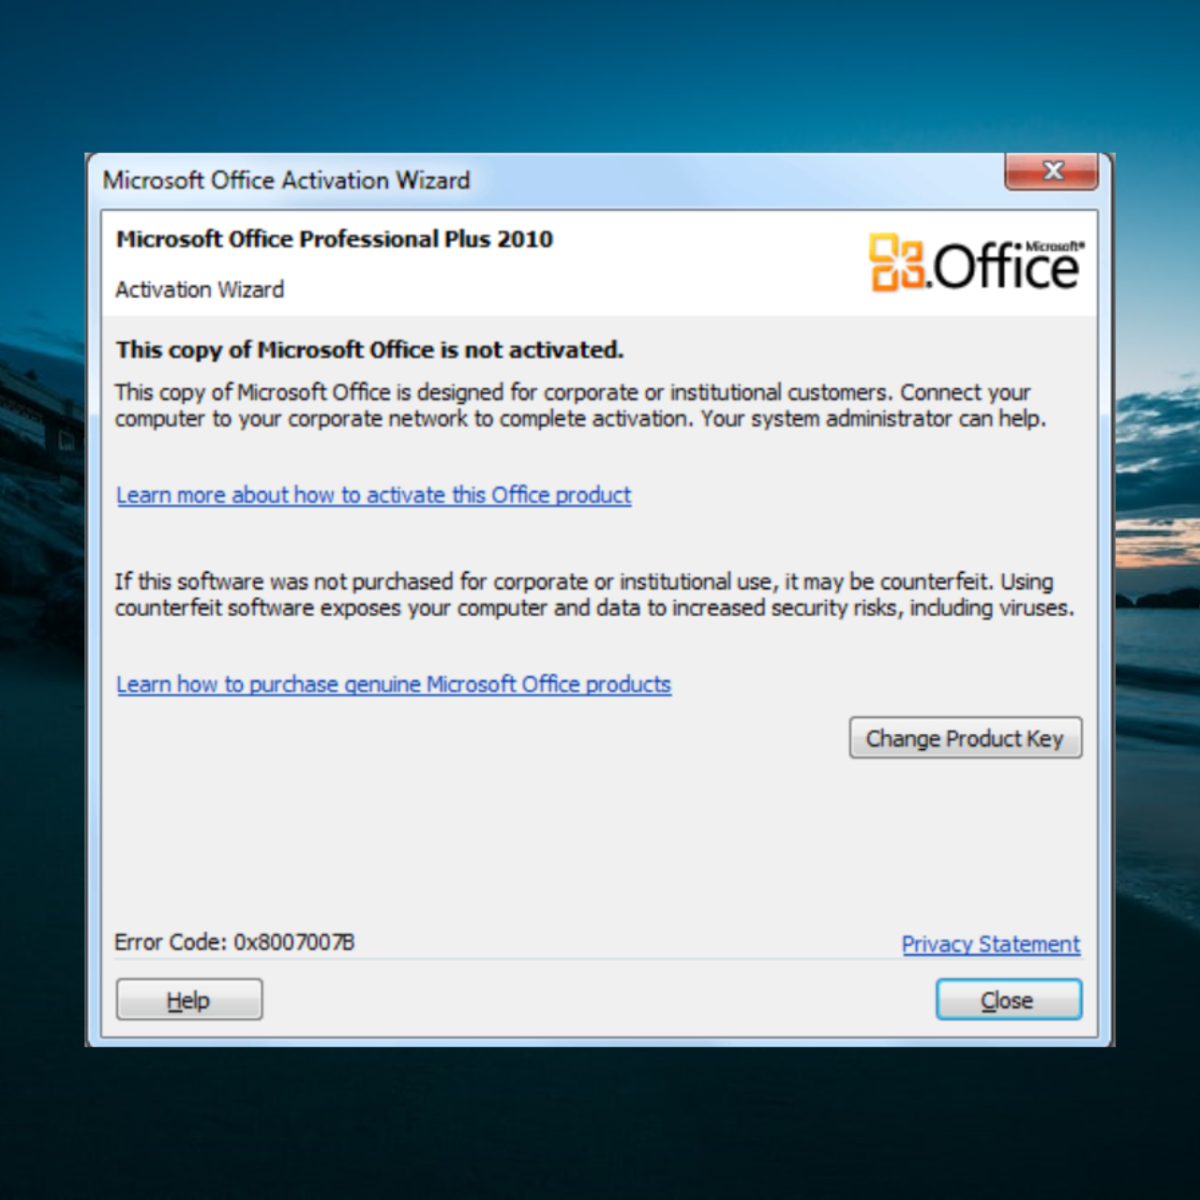 Microsoft Office Activation Wizard: All you Need to Know